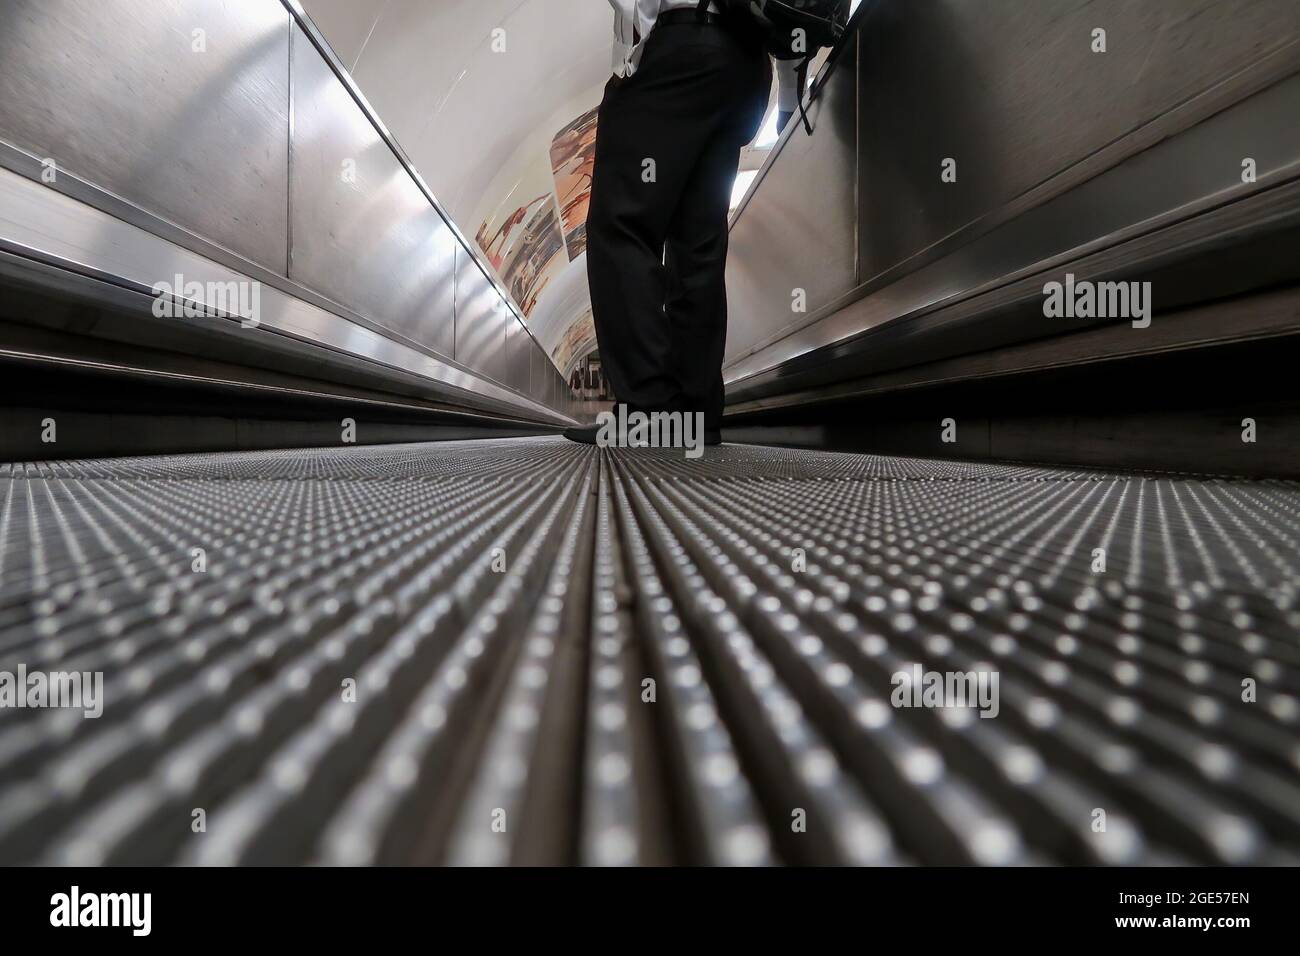 Low angle view of a male commuter standing on moving walkway Stock Photo